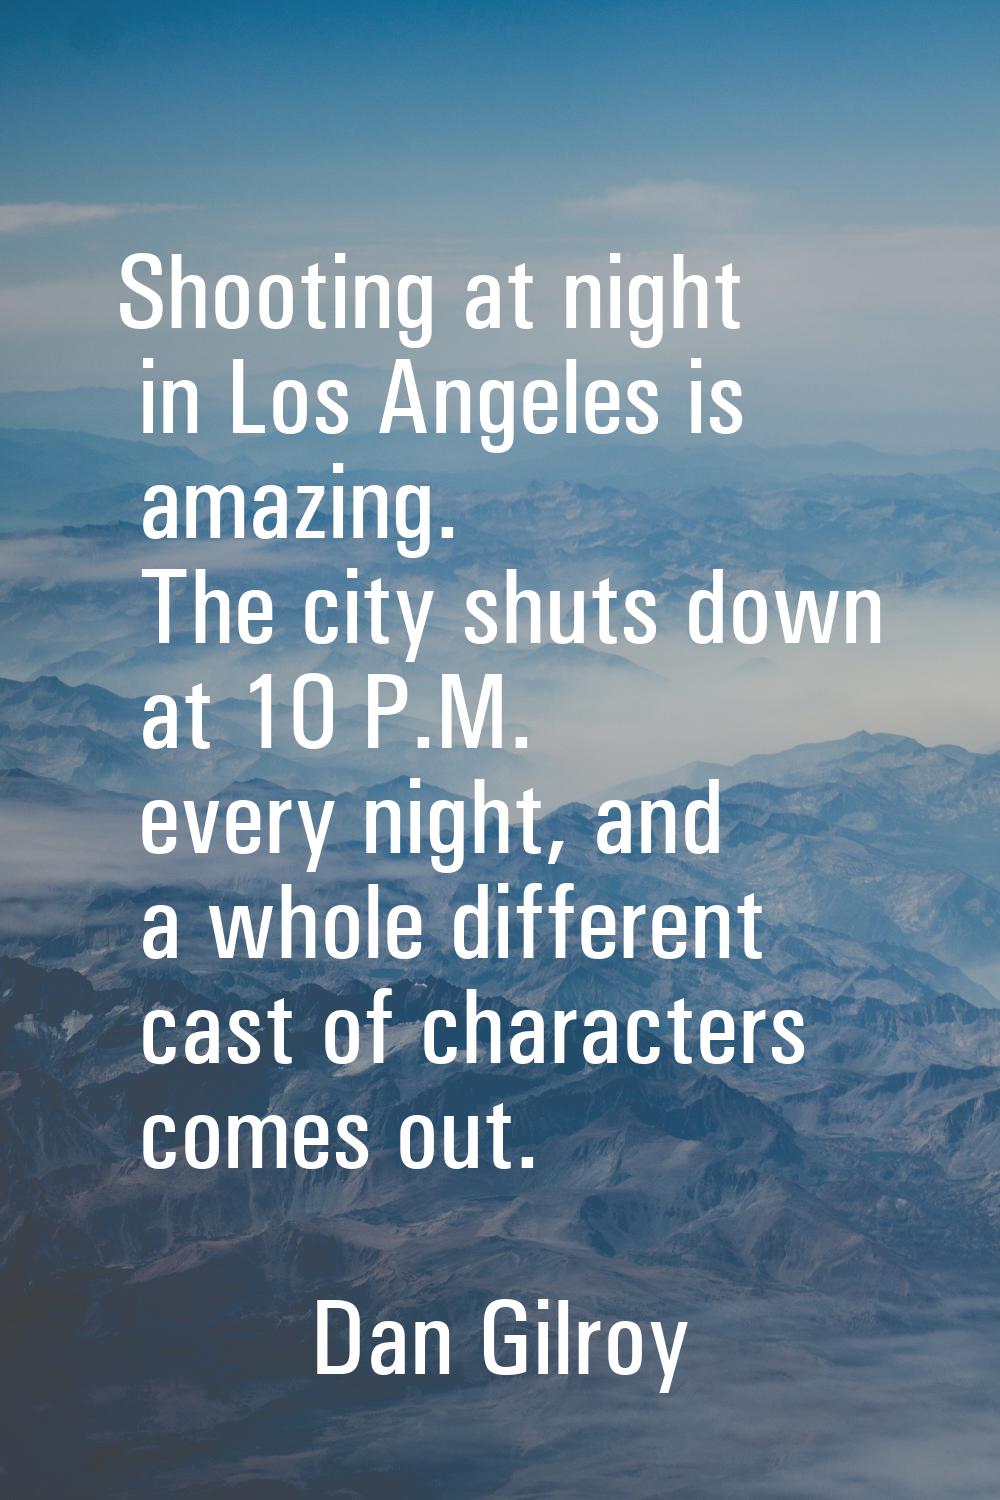 Shooting at night in Los Angeles is amazing. The city shuts down at 10 P.M. every night, and a whol